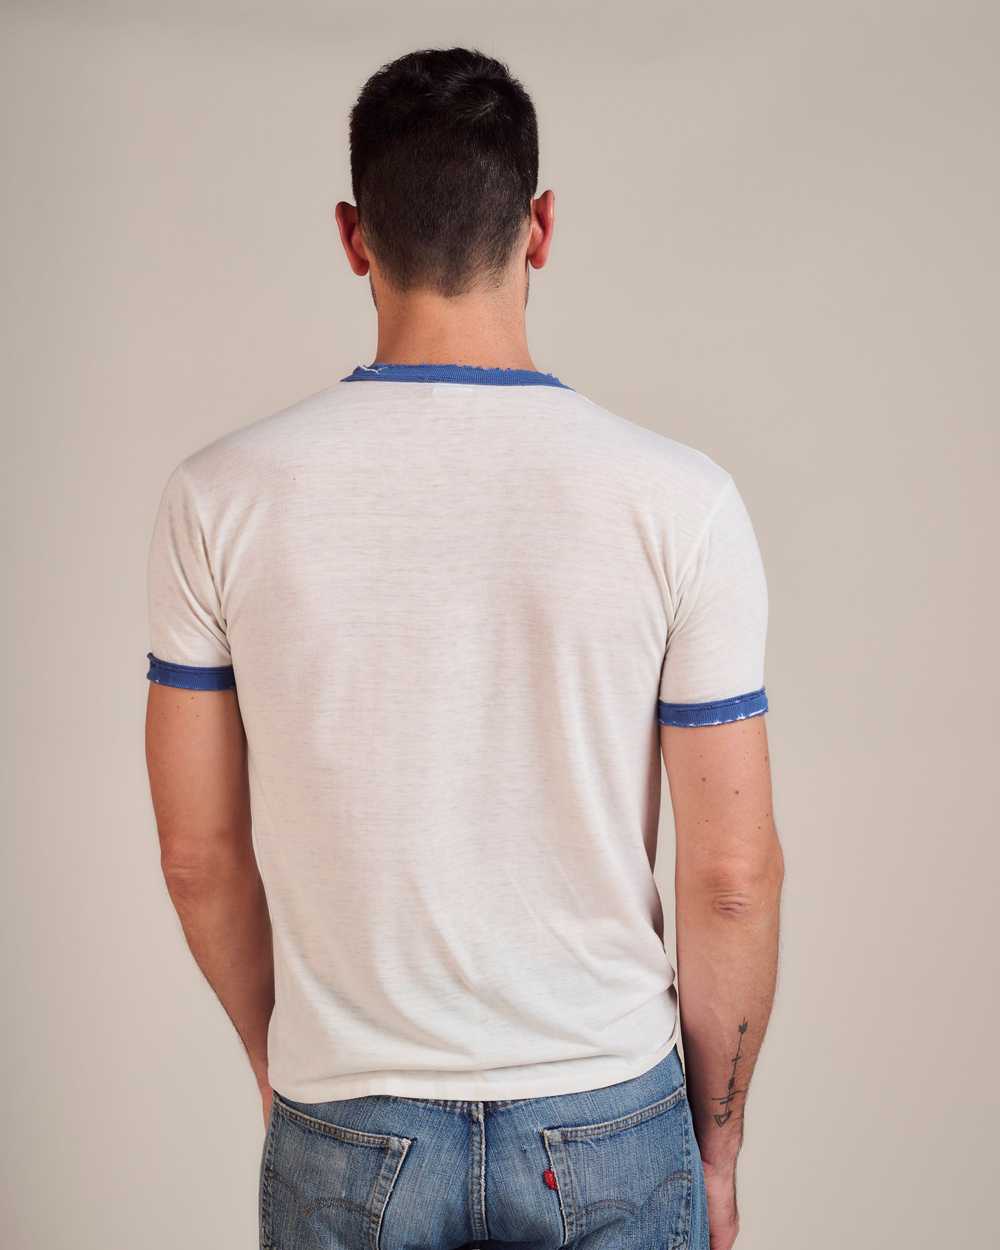 70's Tail For Men T-Shirt - image 3